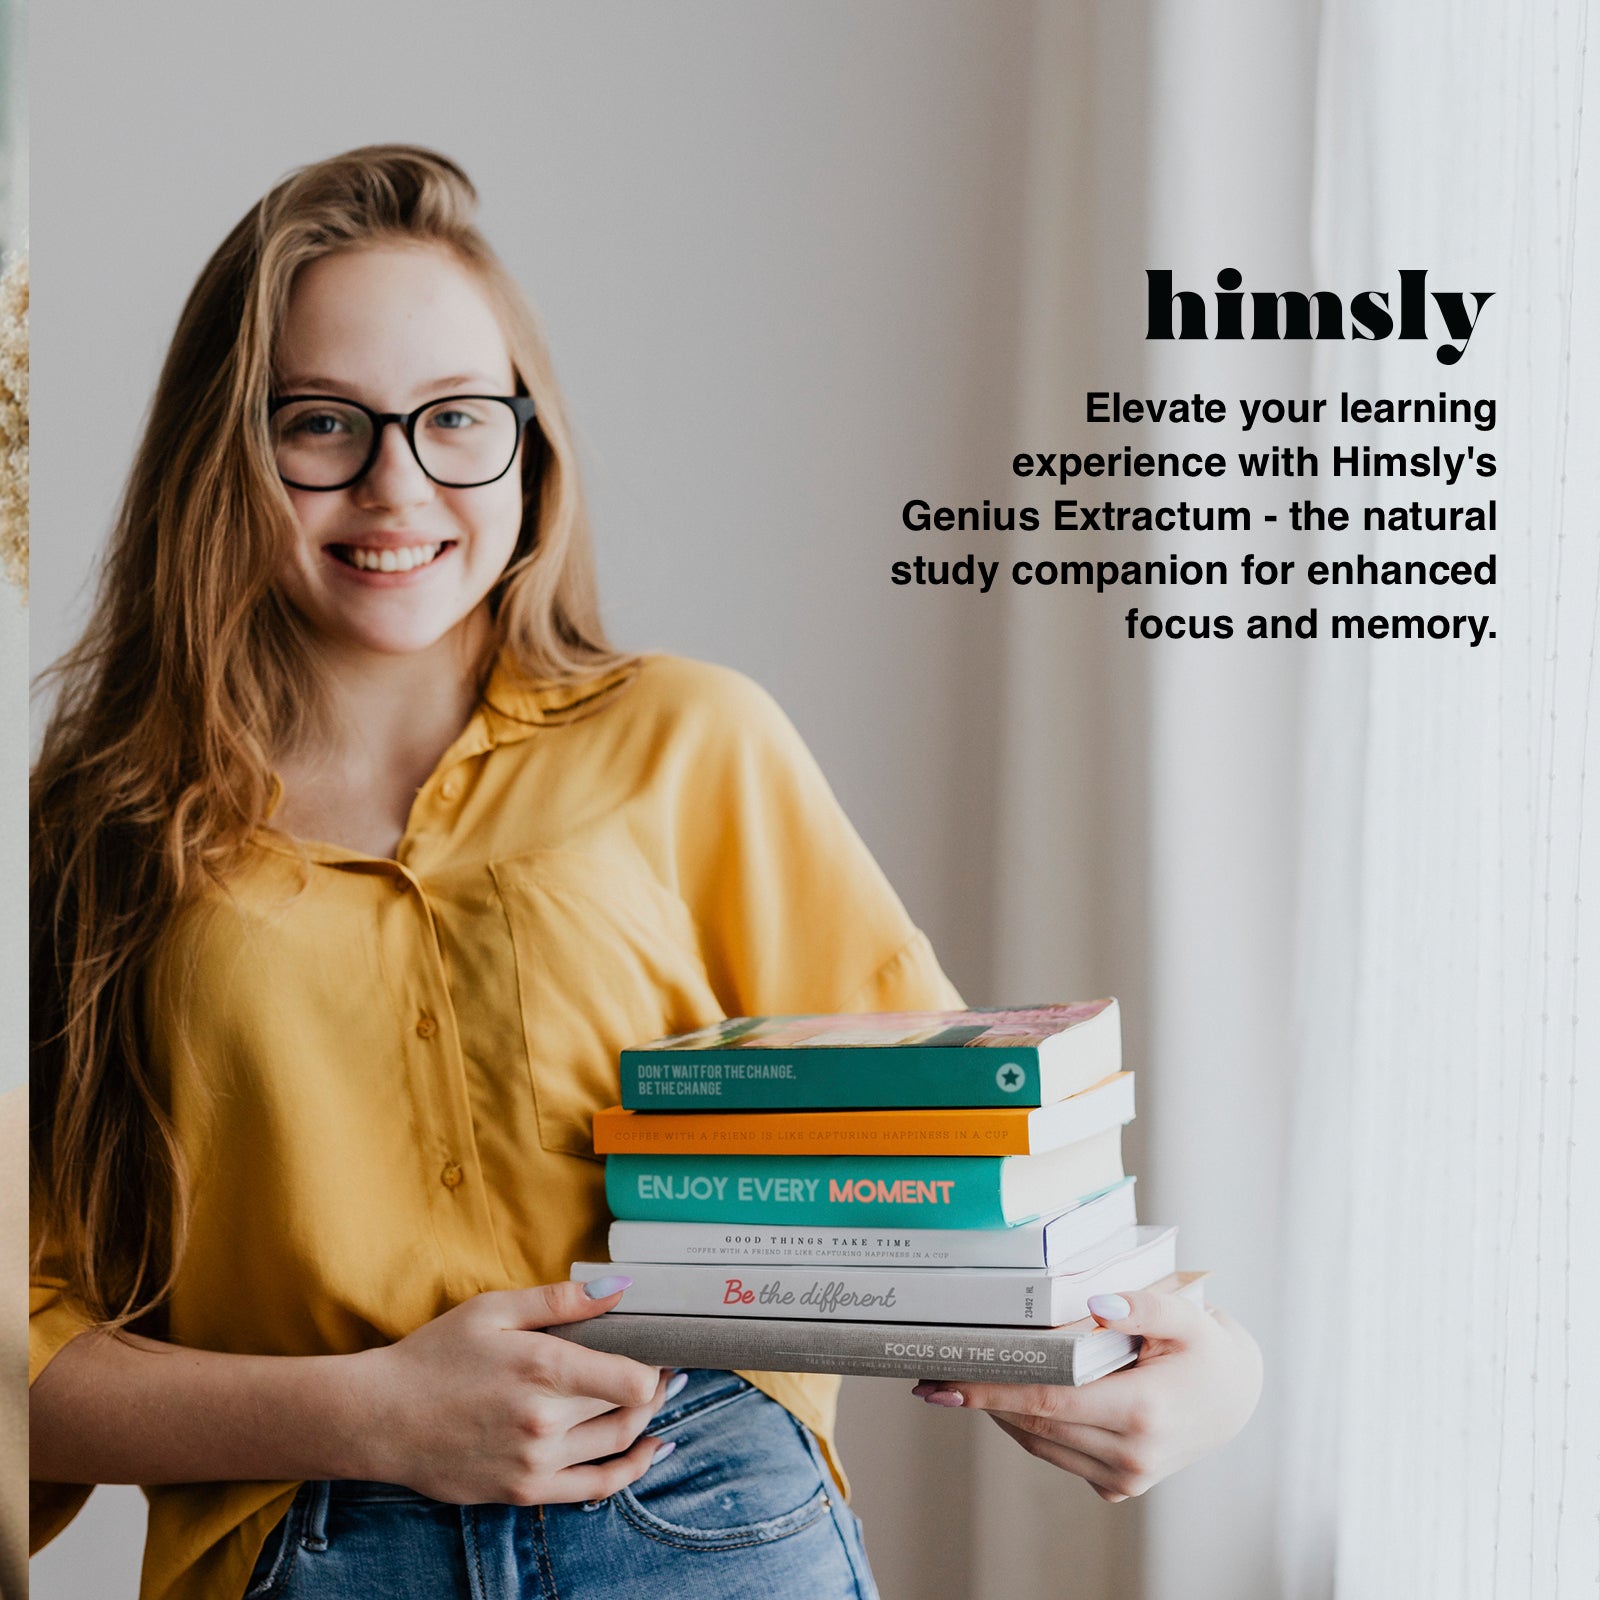 Elevate your learning experience with Himsly's Genius Extractum - the natural study companion for enhanced focus and memory.